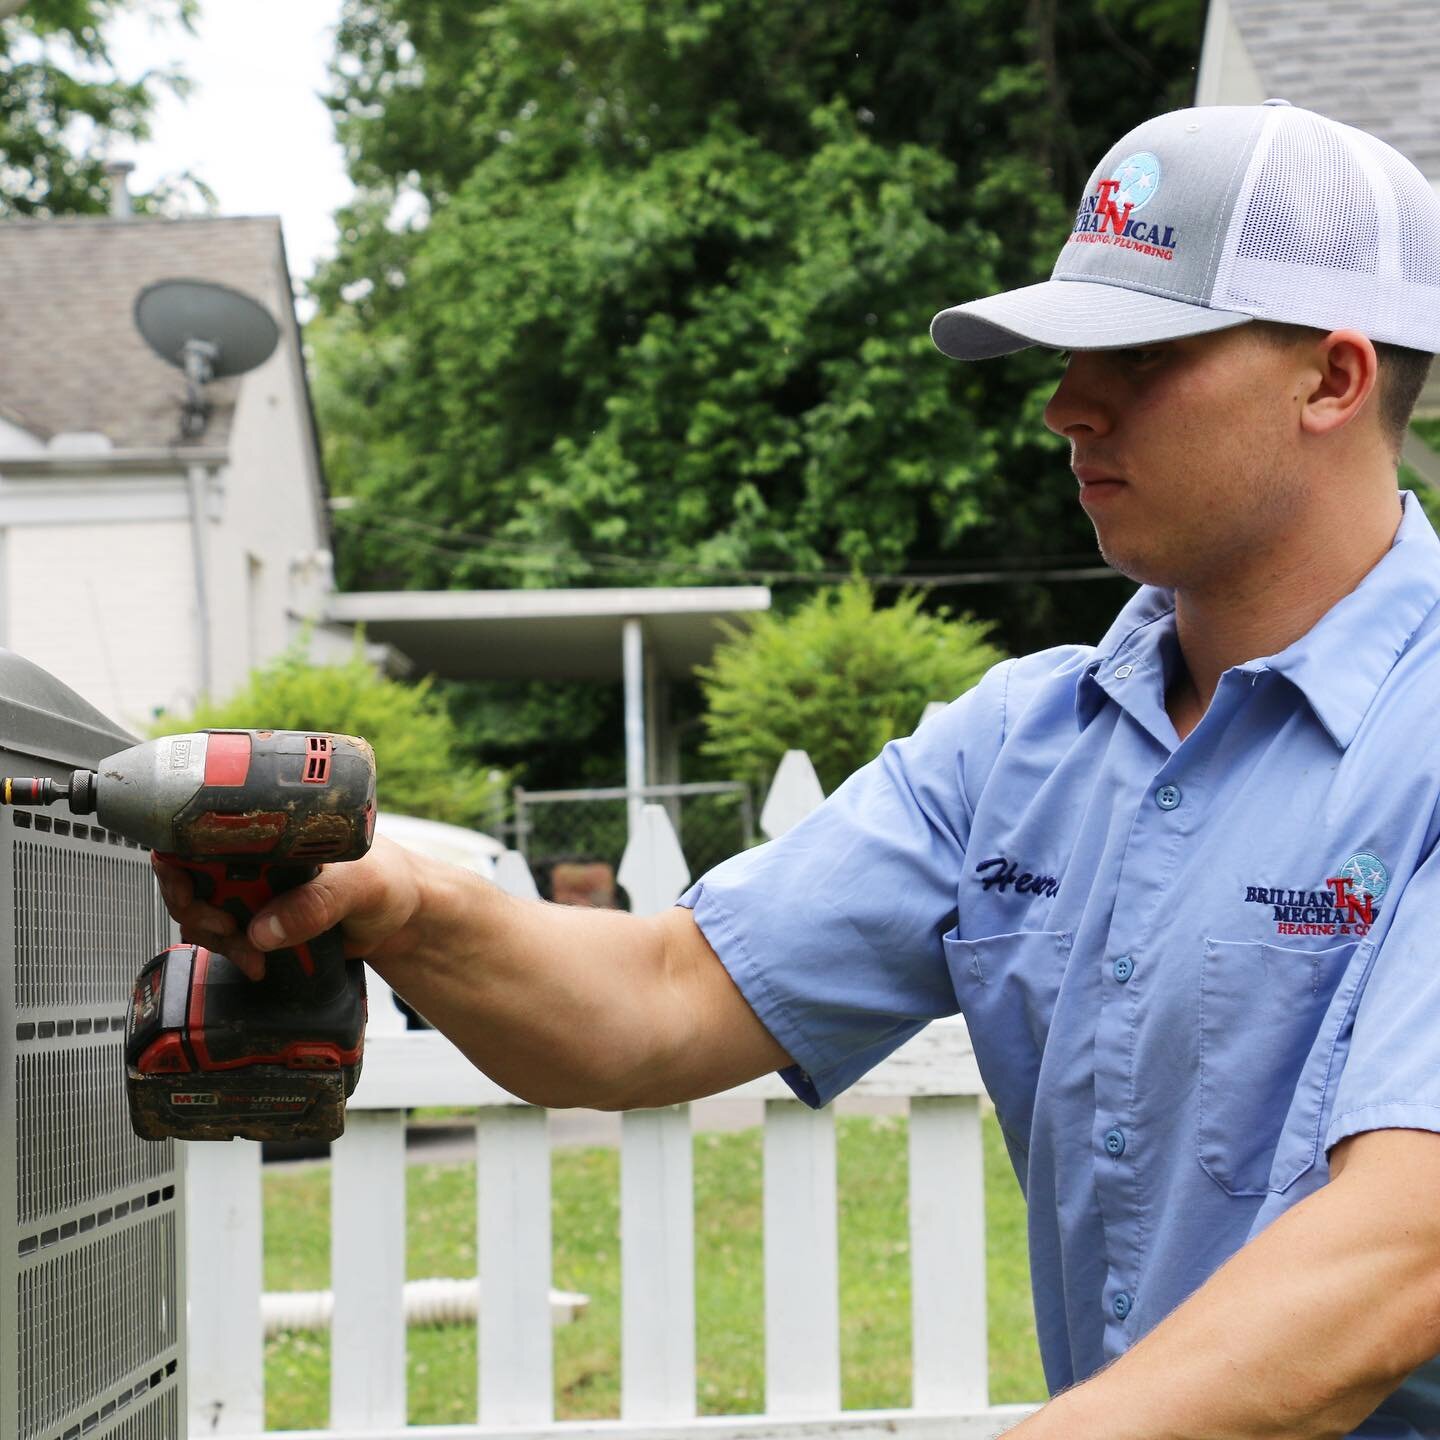 High Quality, Affordable, Same Day HVAC Service! Make the Brilliant call to schedule a maintenance and ask us about our $500 new unit rebate! 615-393-8586